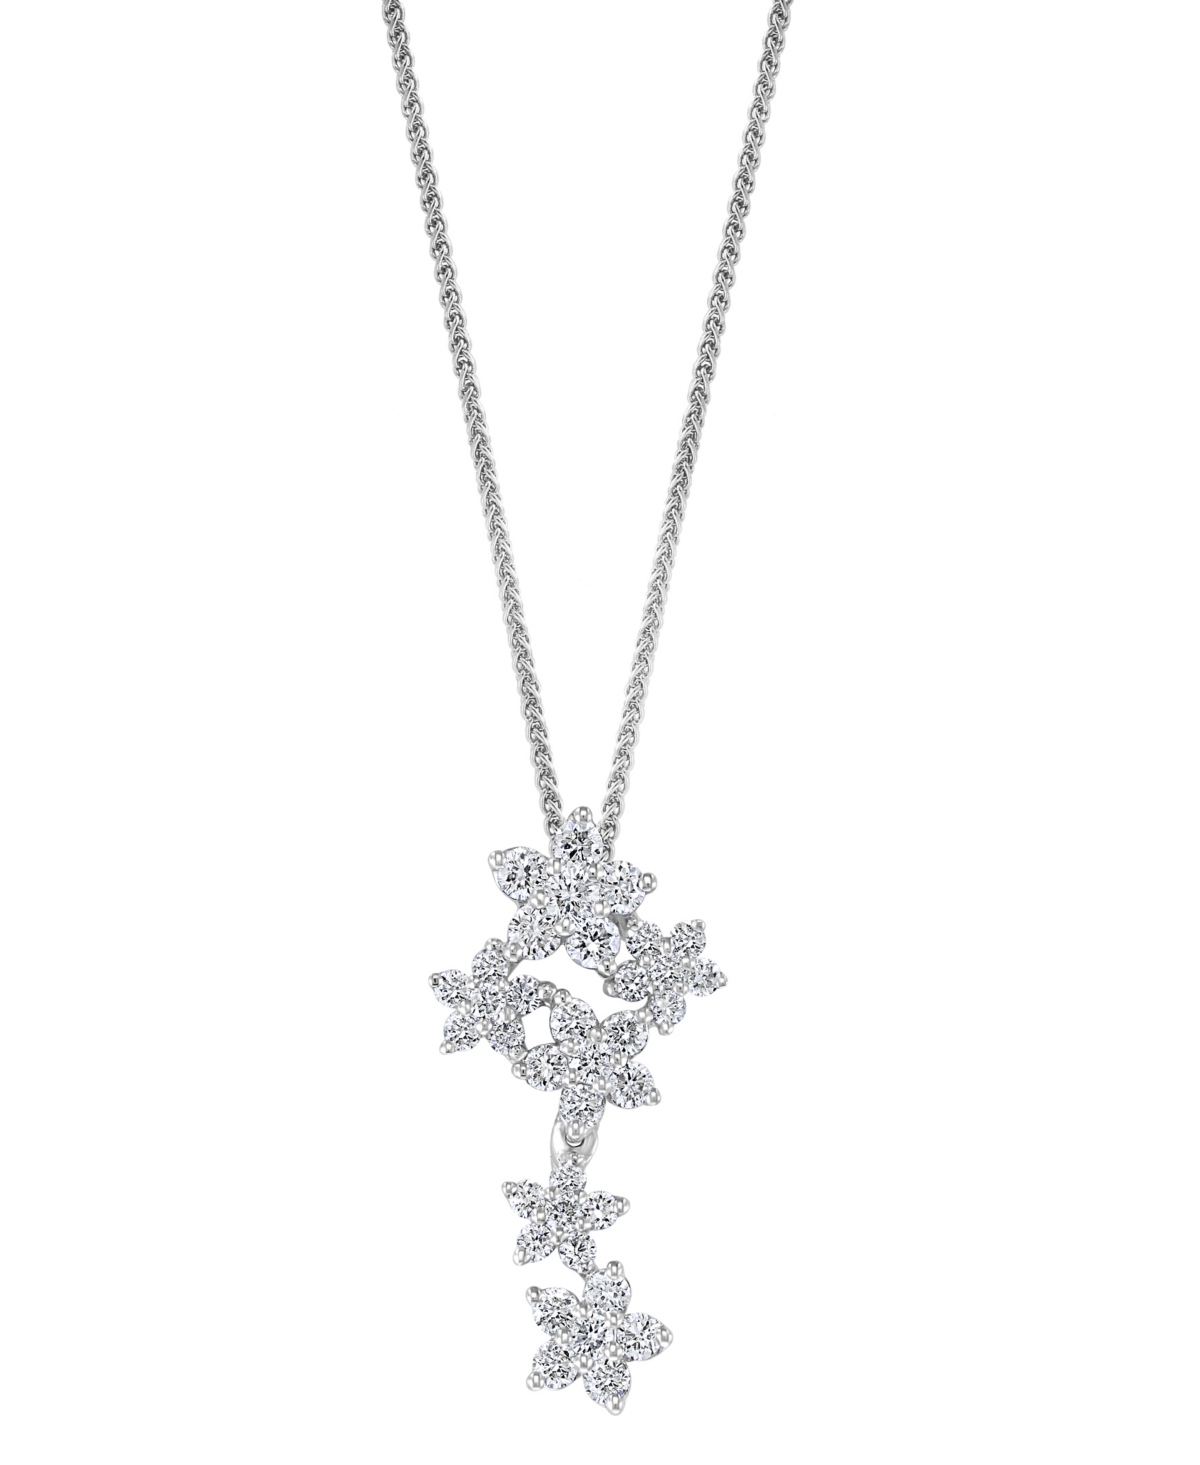 Lali Jewels Diamond Floral Pendant Necklace (3/8 ct. t.w.) in 14K White Gold - White Gold